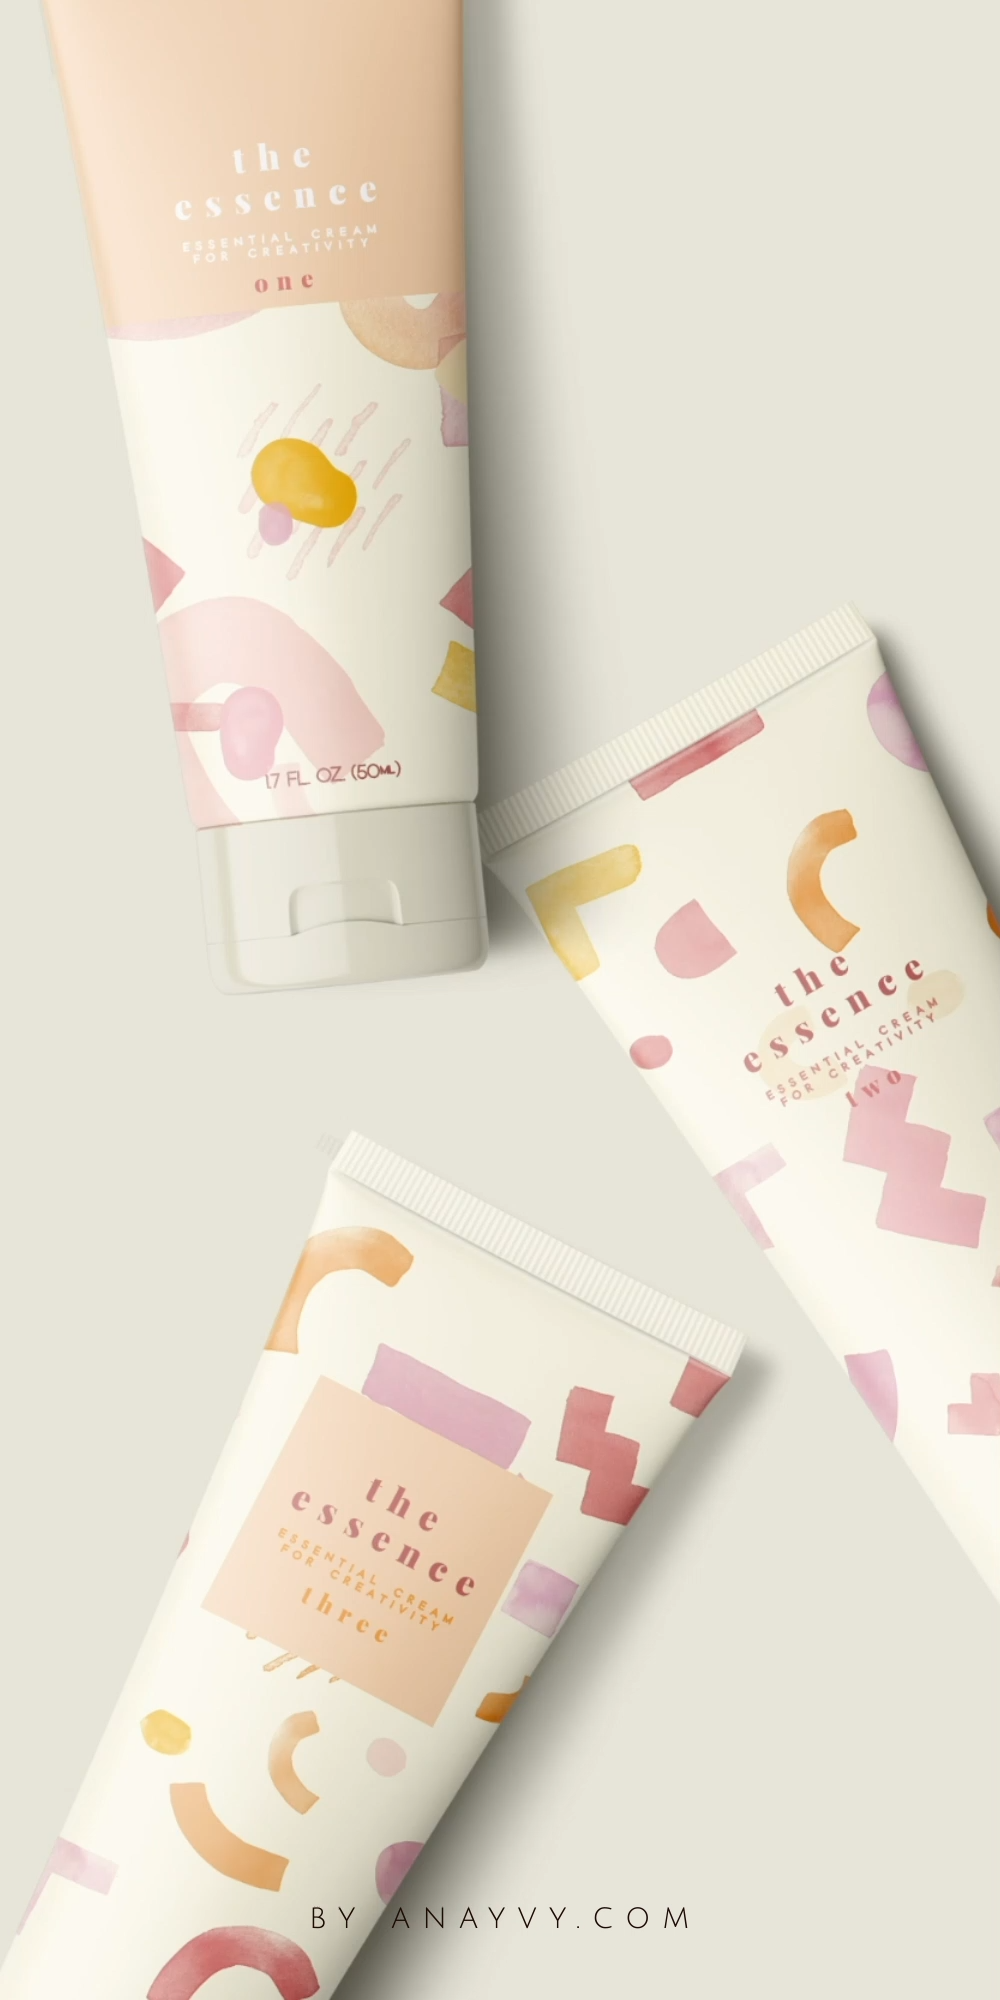 Abstract Watercolor Shapes | an animated design set for branding & social media | by ana & yvy - Abstract Watercolor Shapes | an animated design set for branding & social media | by ana & yvy -   18 beauty Design packaging ideas